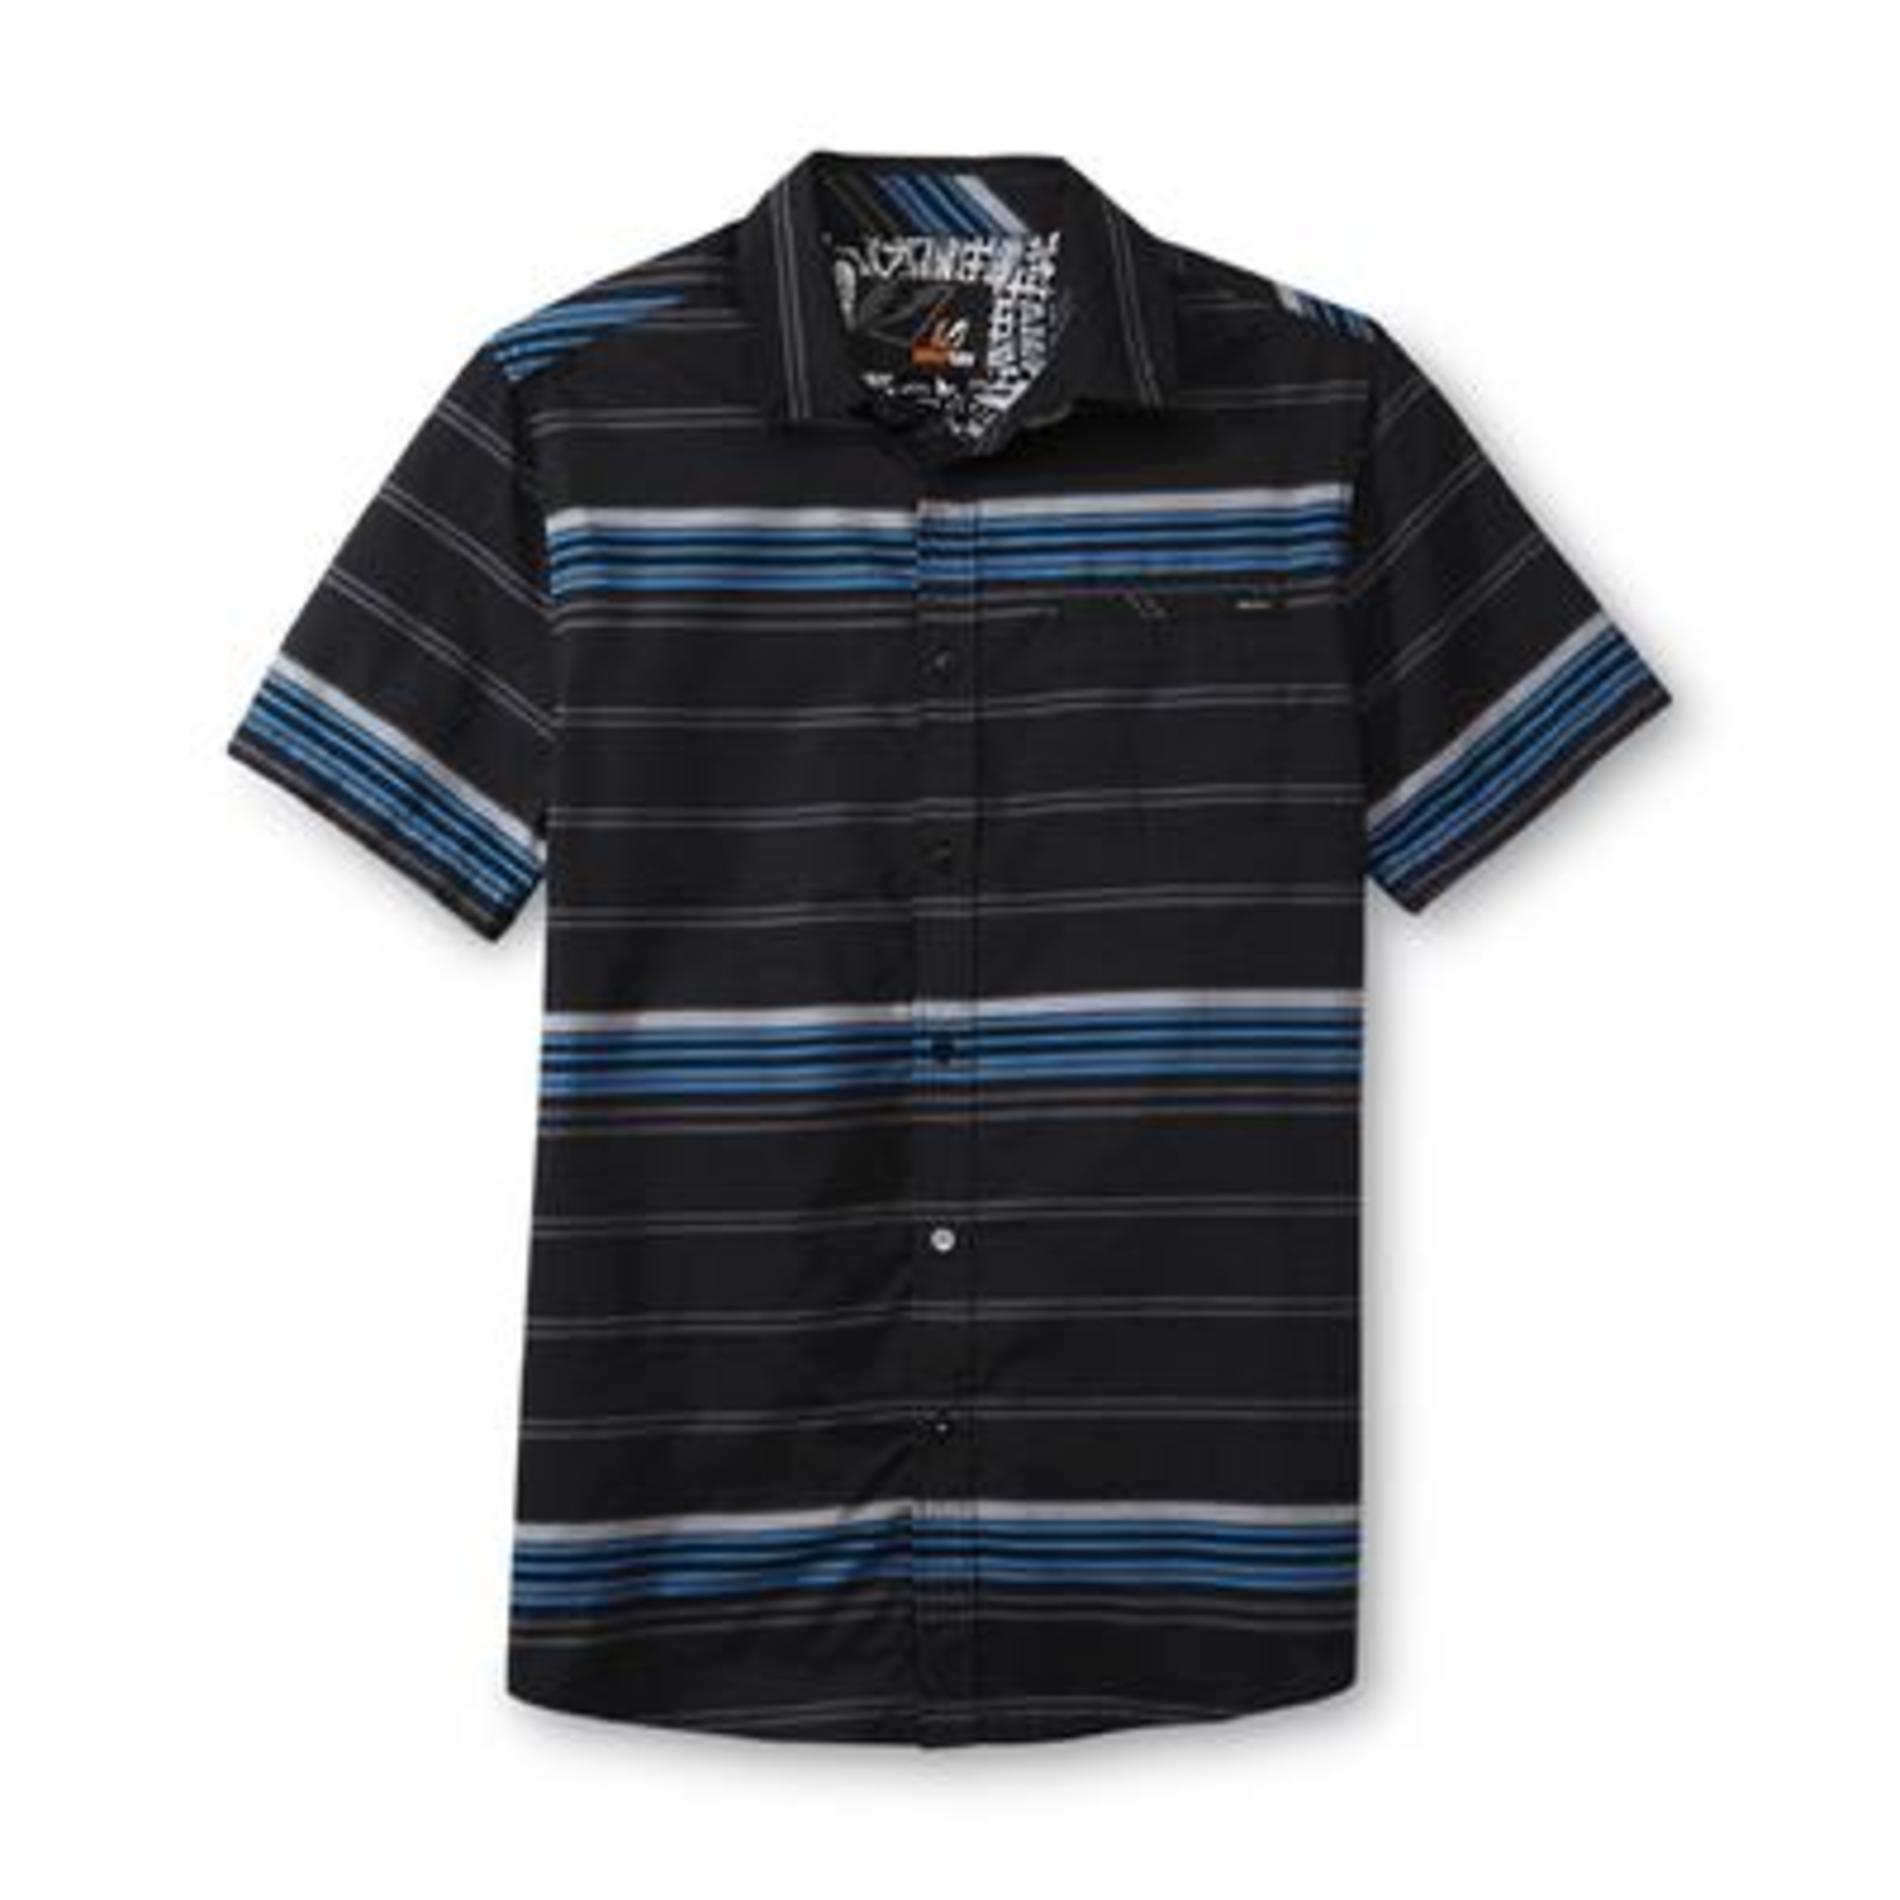 Amplify Young Men's Short-Sleeve Button-Front Shirt